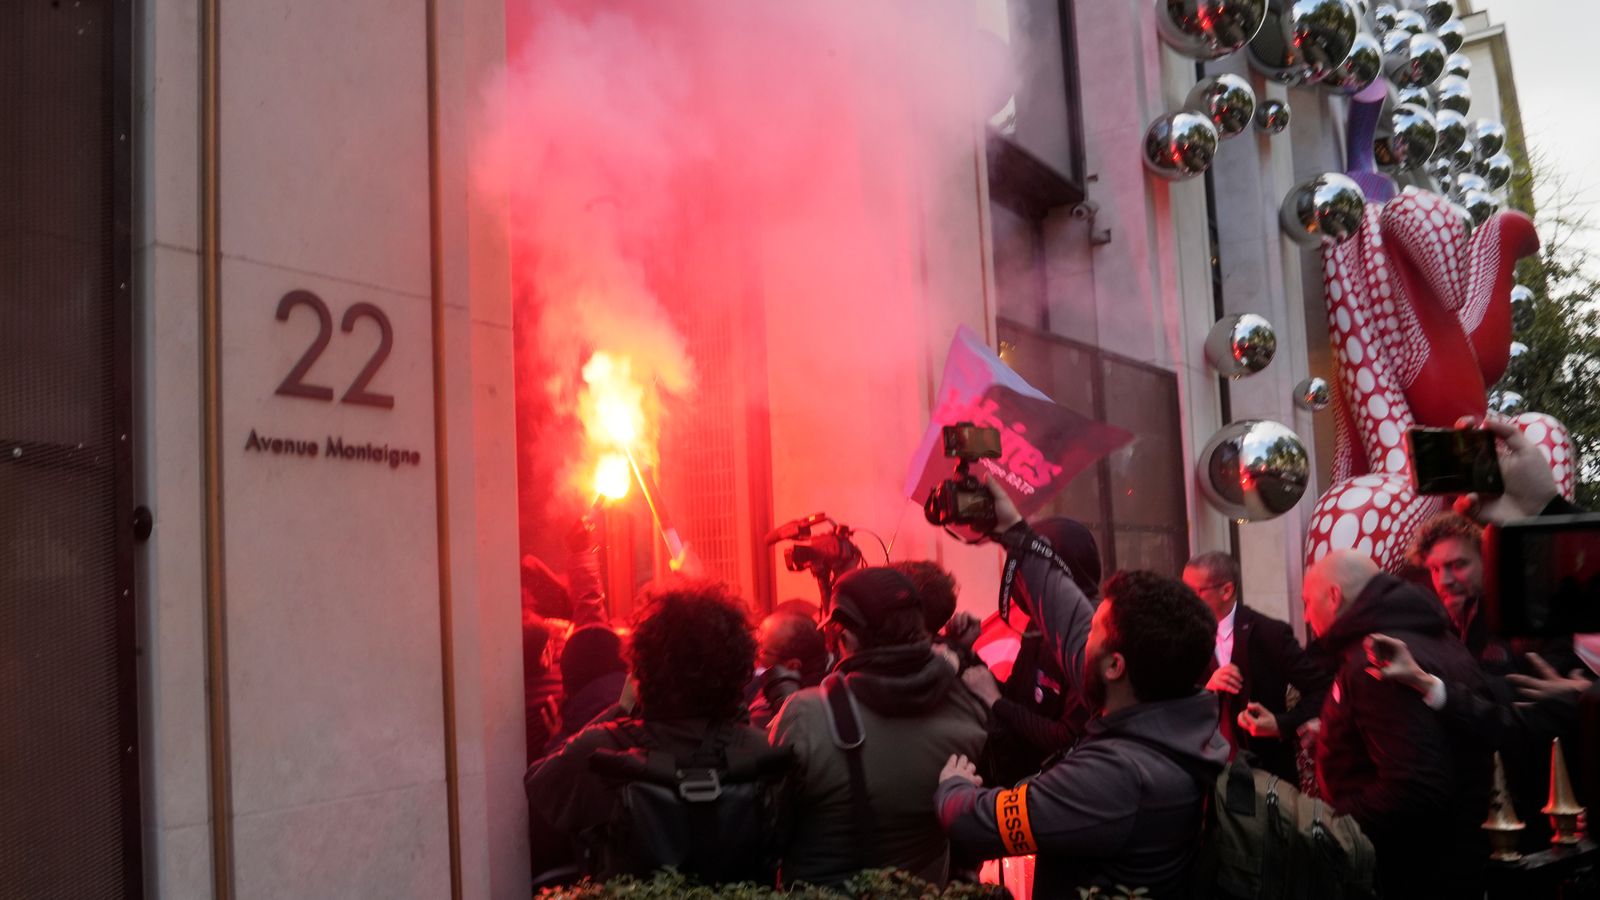 Railway employees invade Louis Vuitton HQ  as protests erupt throughout France on eve of resolution on retirement age